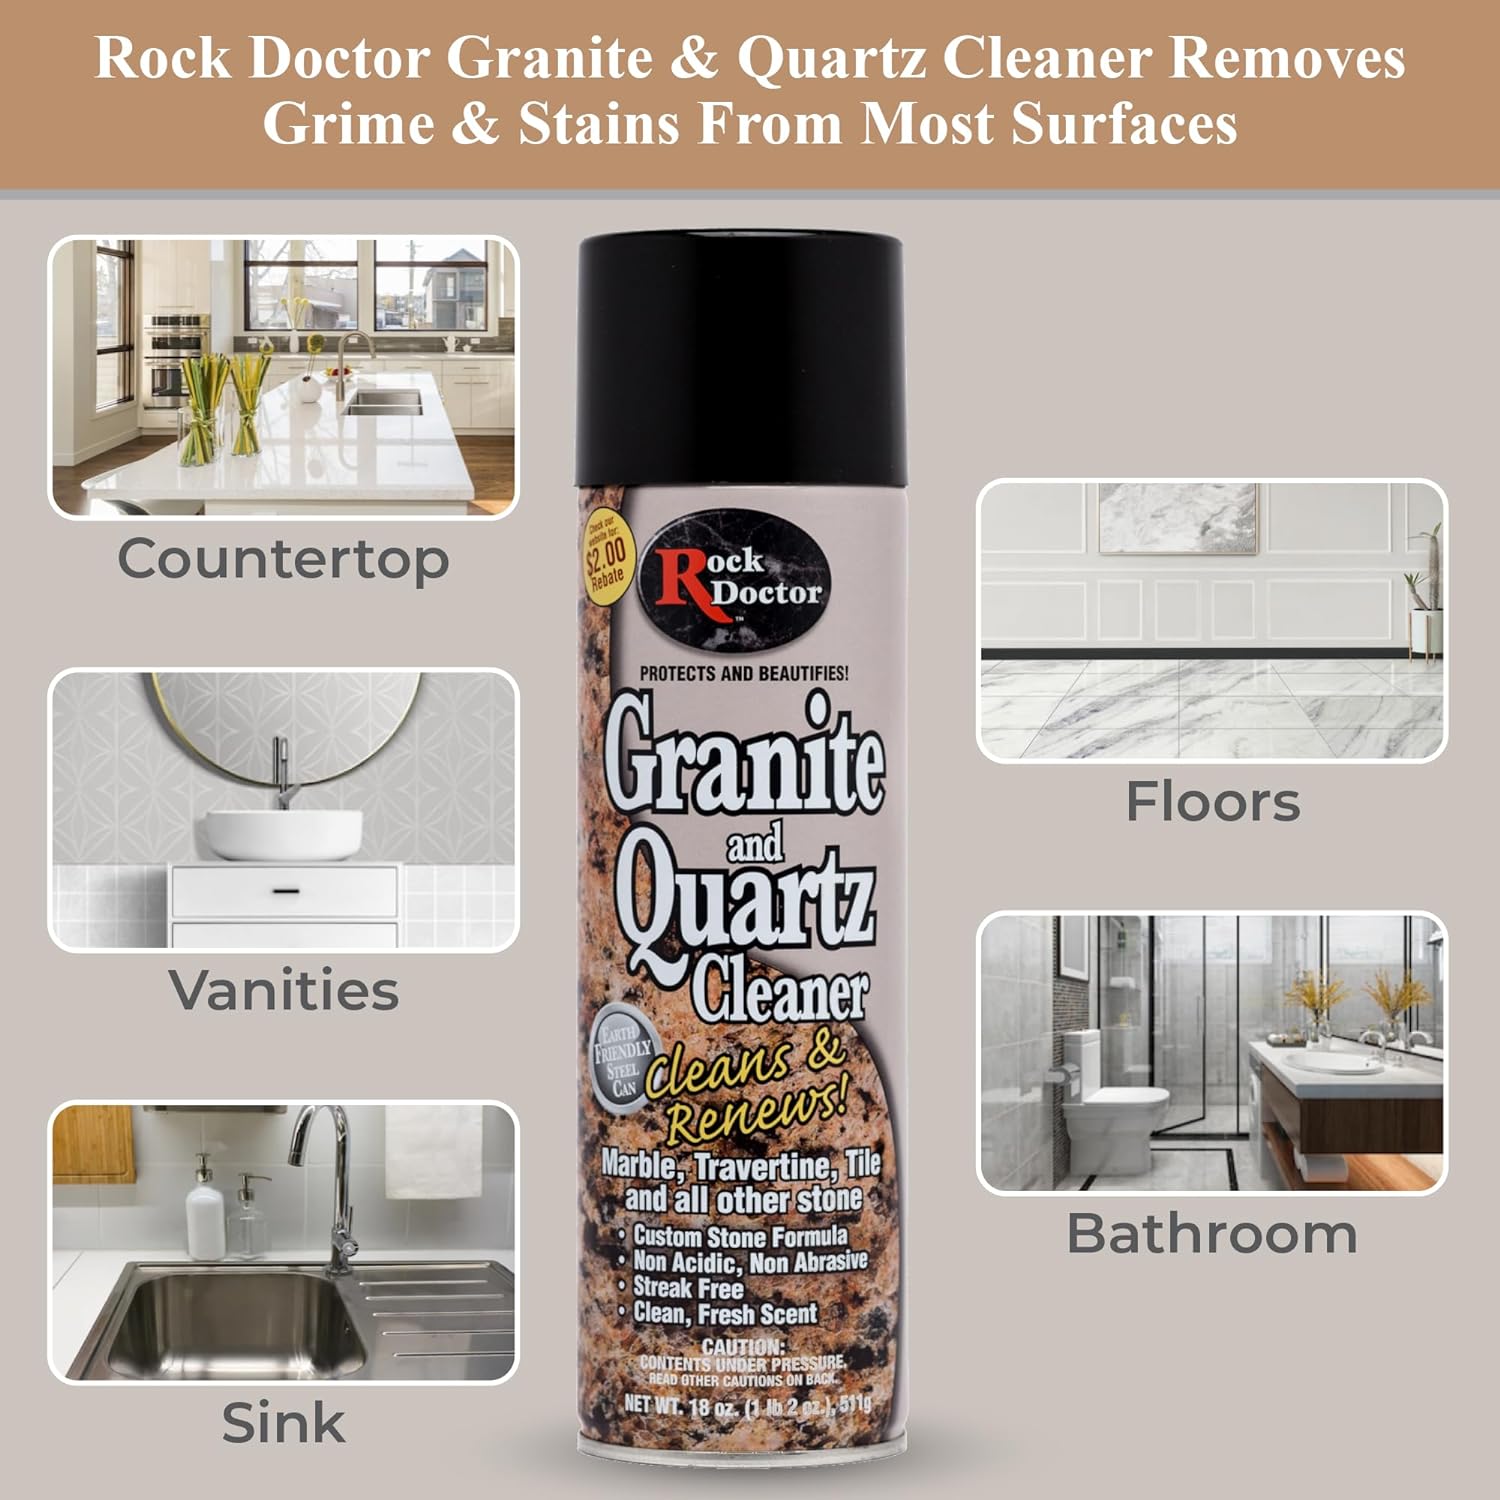 Rock Doctor Granite Cleaner - Cleans& Renews Surfaces - 18 oz Surface Cleaner Spray, Granite/Marble Countertop Cleaner, Cleaning Spray for Vanity, Table Top, Kitchen Counters, Stone Surfaces Pack of 4 : Health & Household